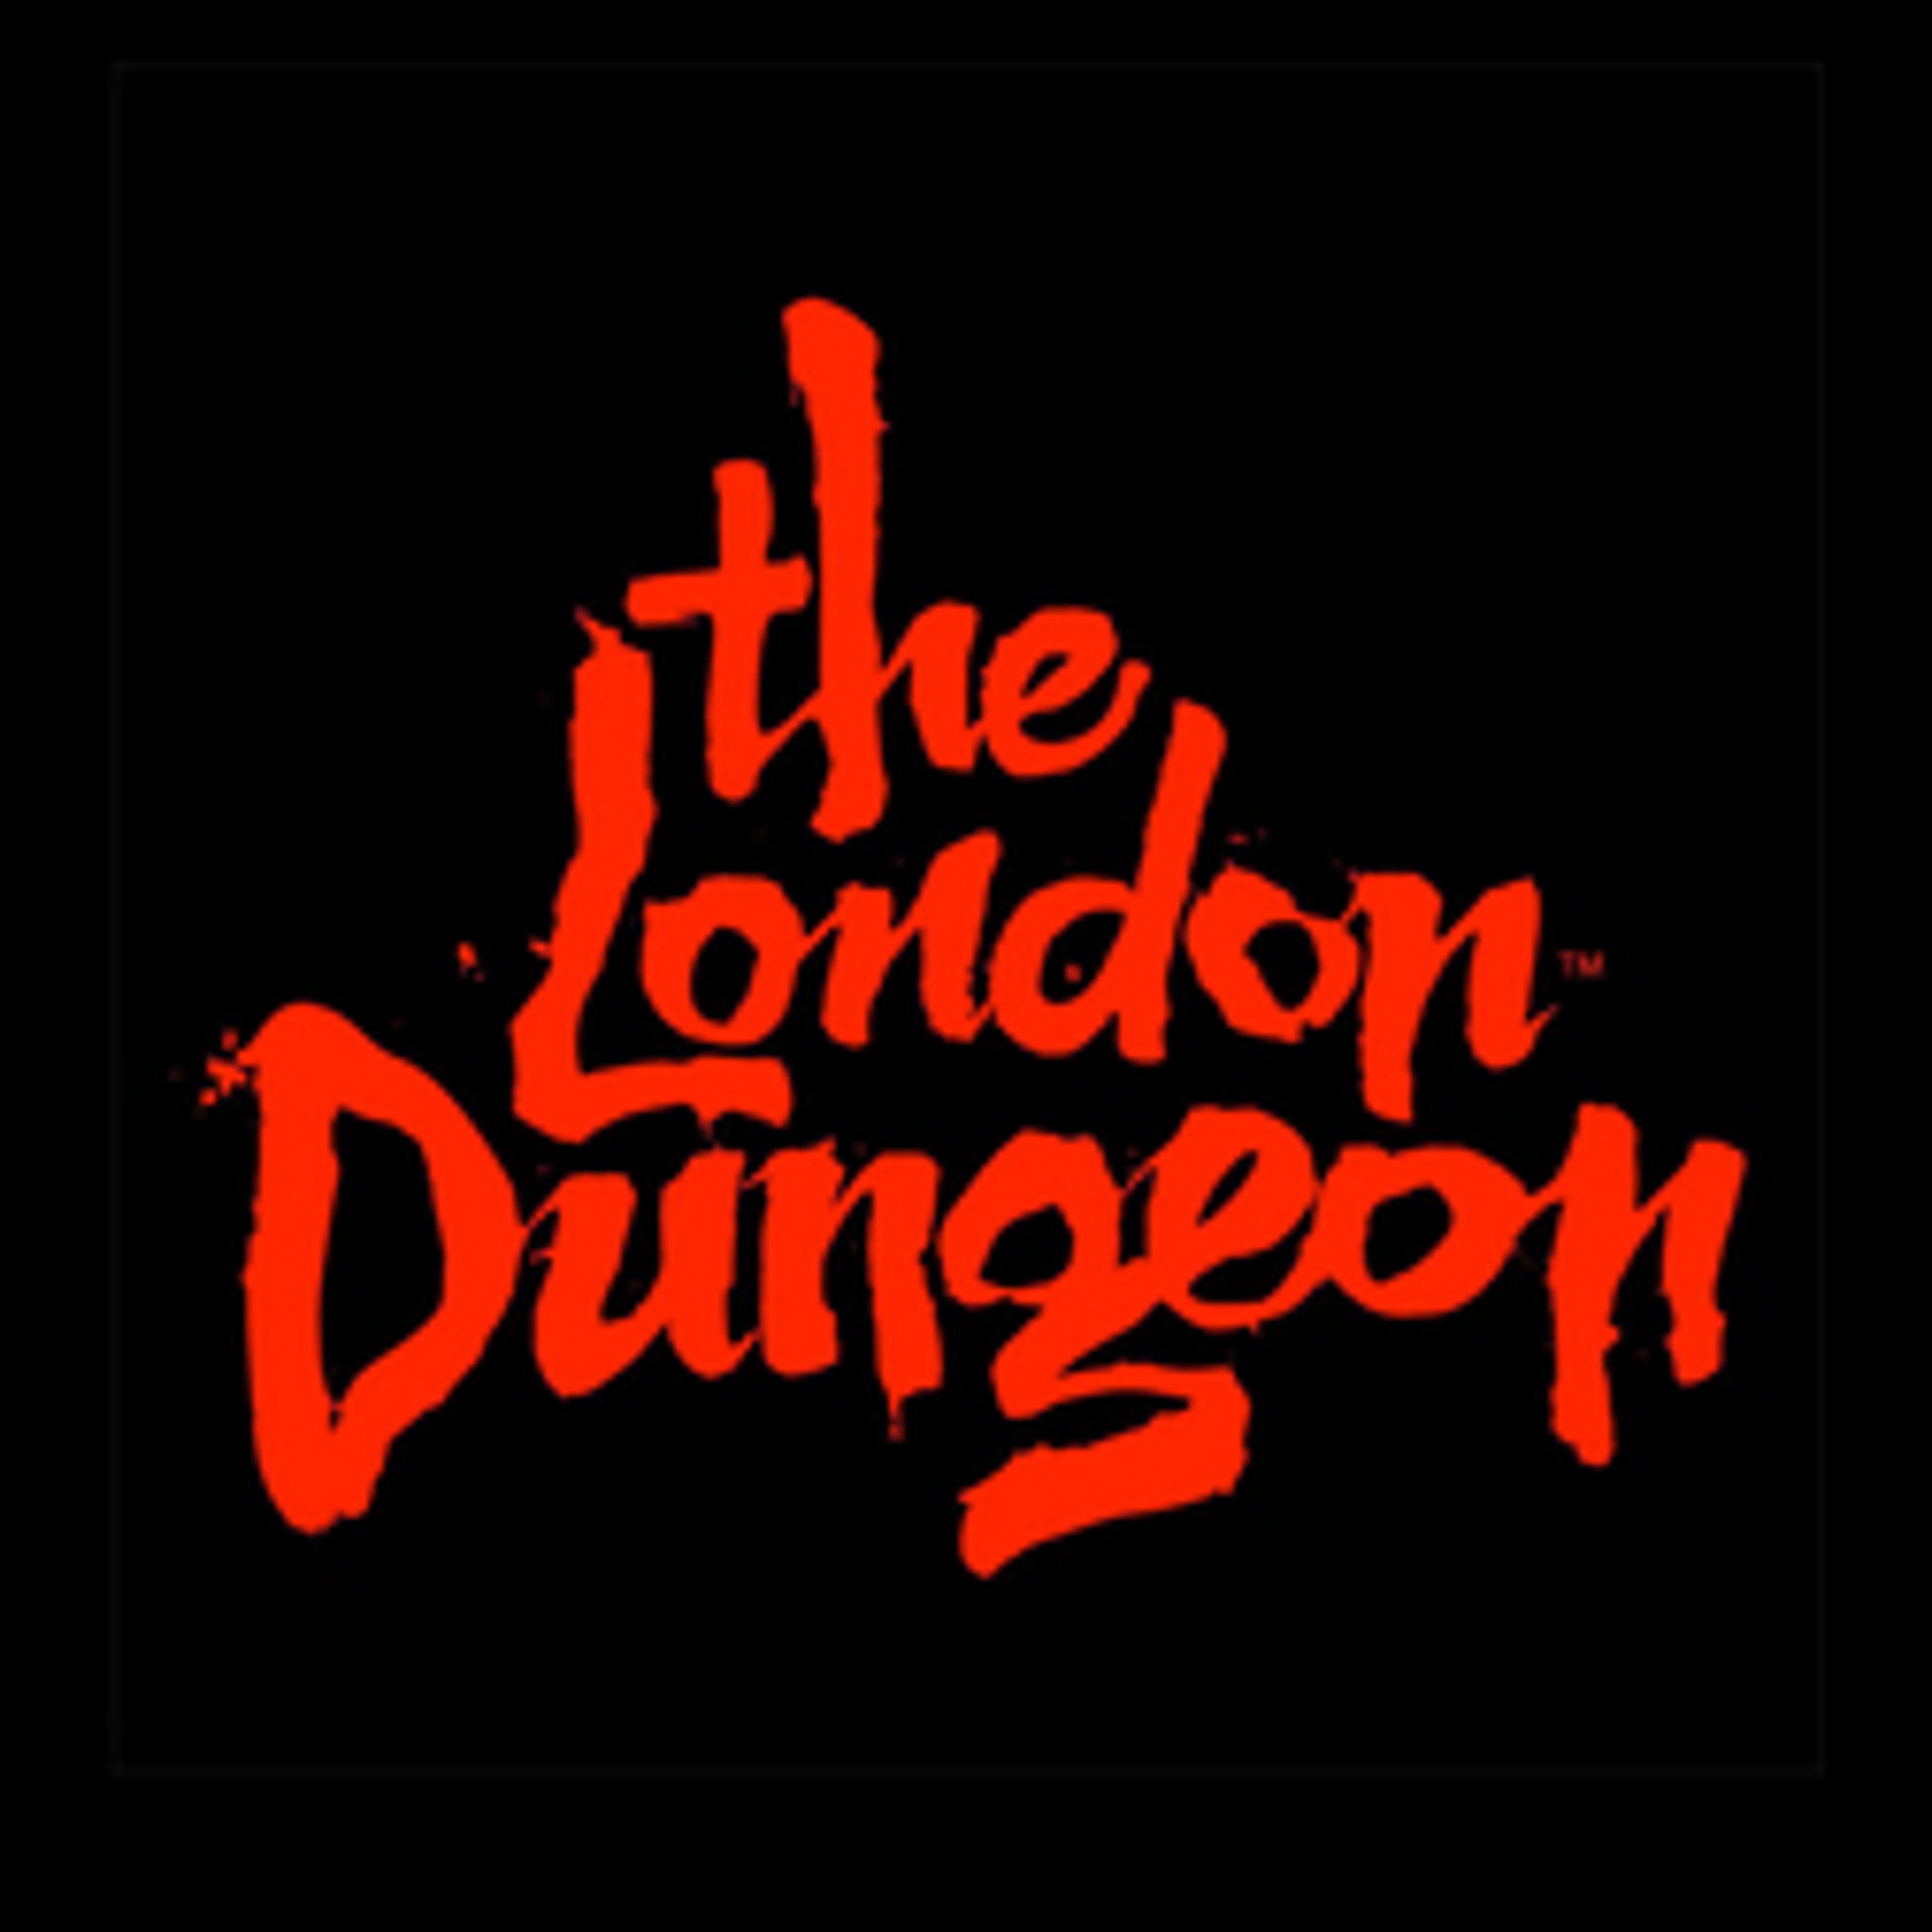  The York Dungeon 